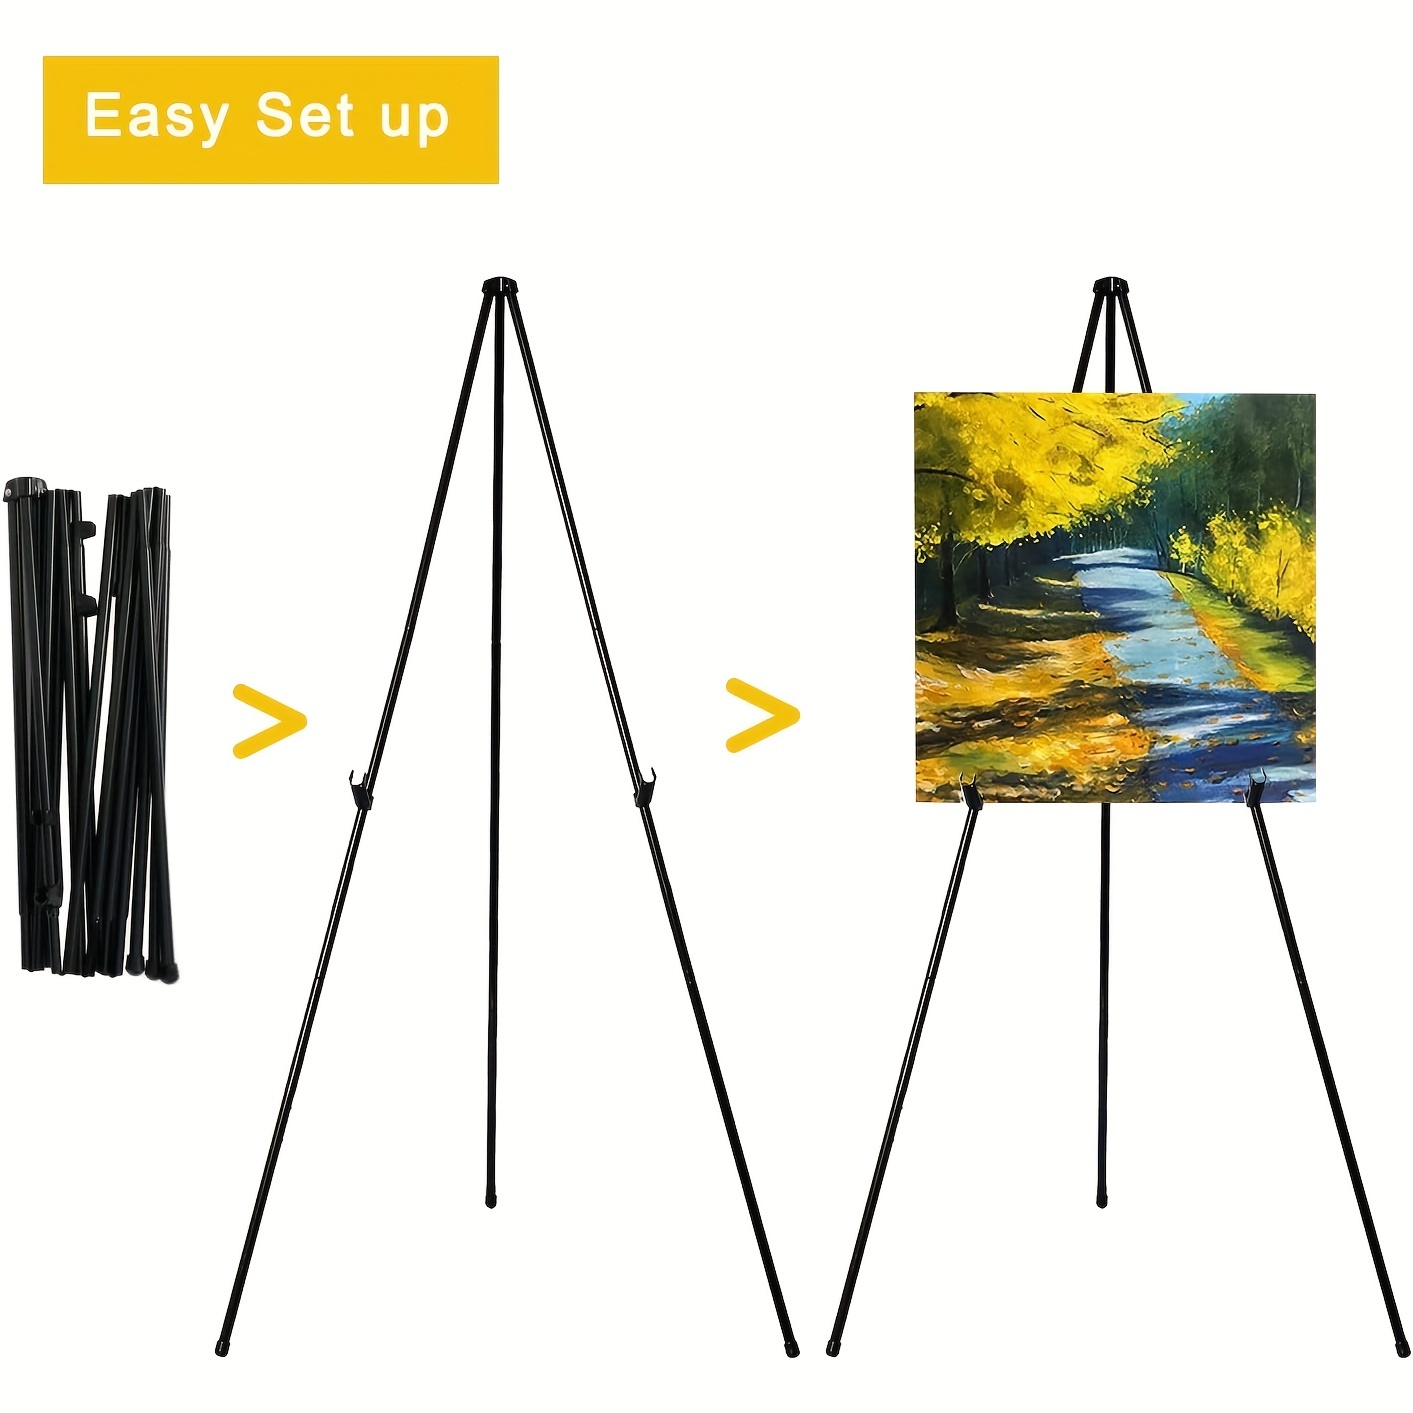 63 inch Tall Display Easel, Folding Instant Poster Easel, Black Steel Metal Telescoping Art Easel for Display Show, Easy Assembly (6pack)